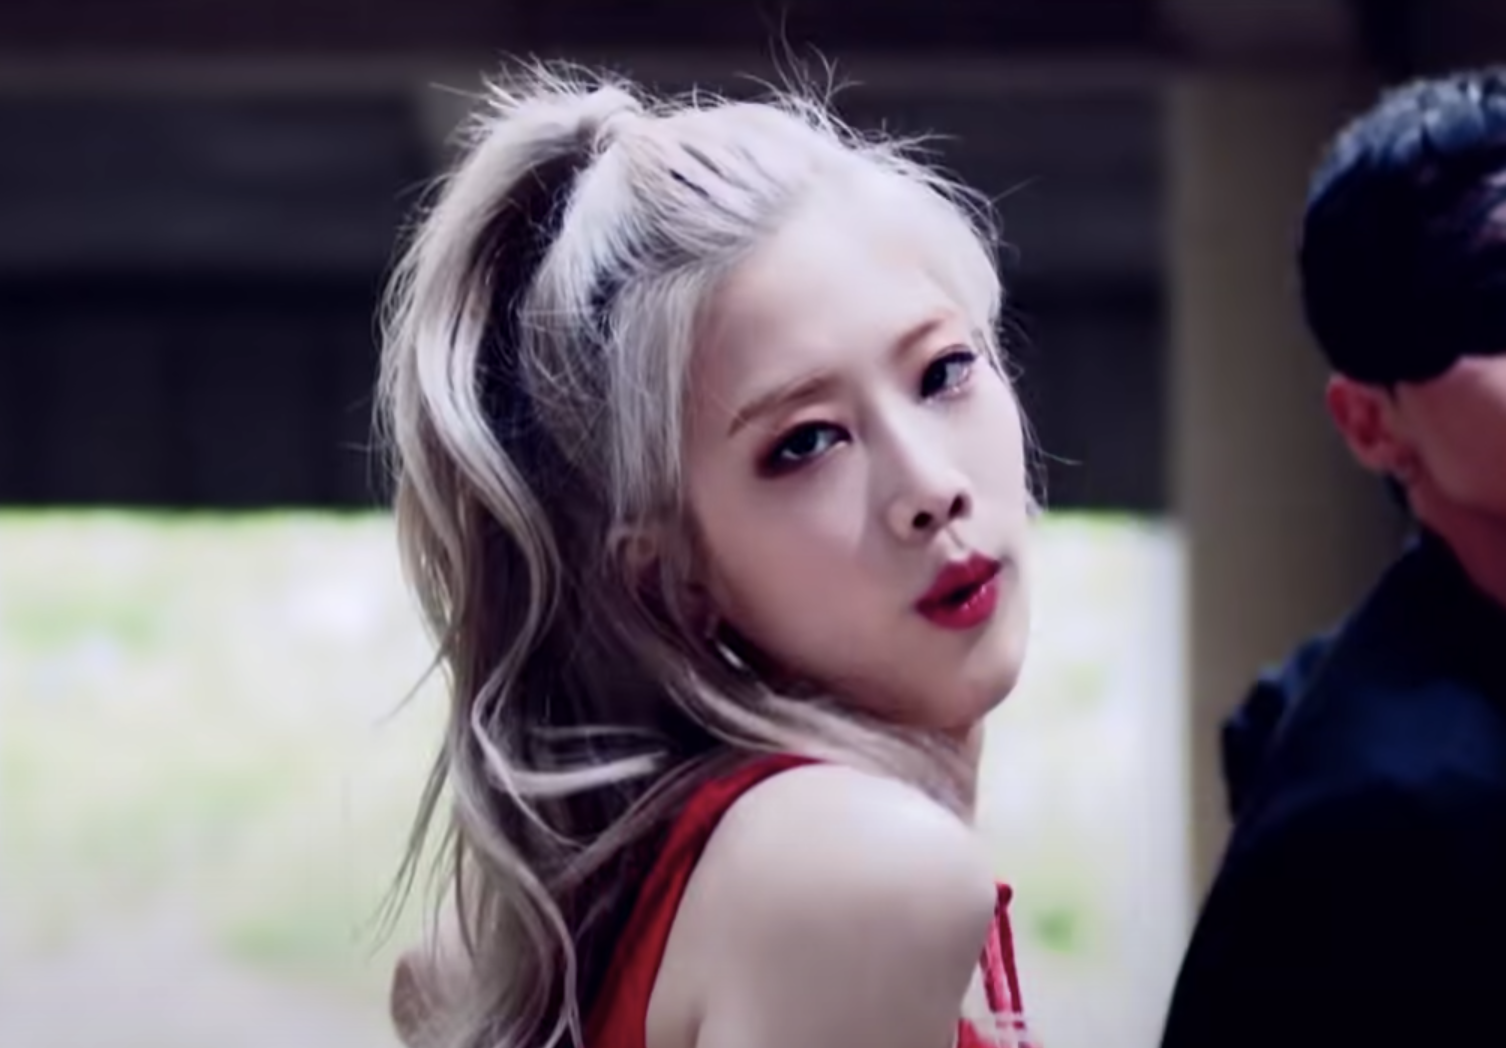 Kim Lip sings into the camera with a sultry look in her eyes and pouty lips